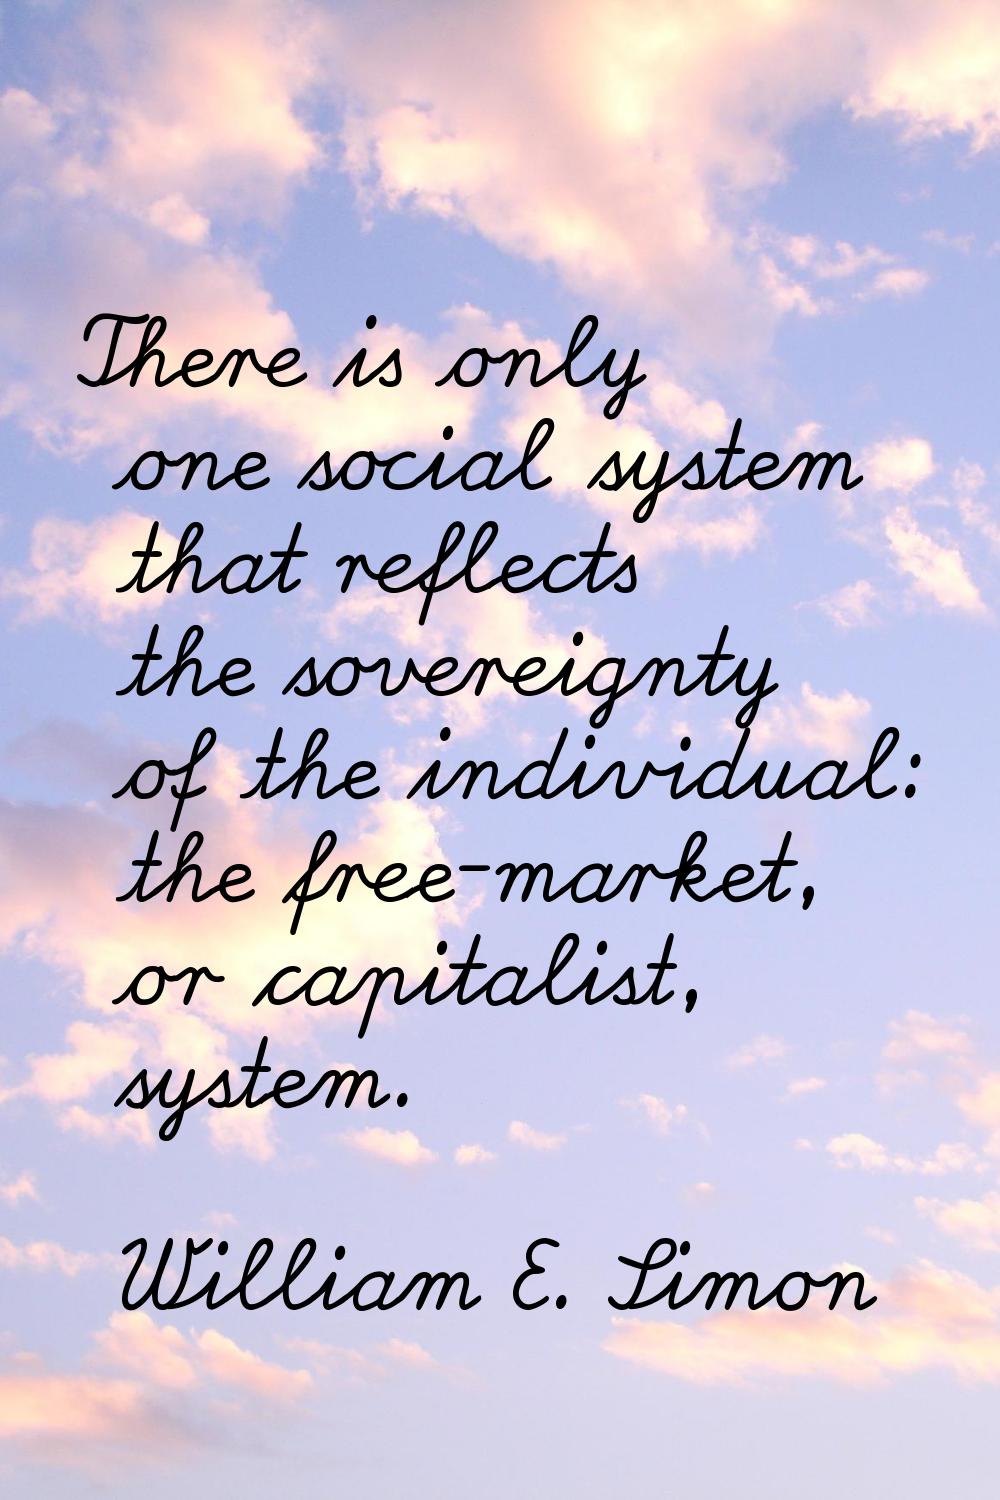 There is only one social system that reflects the sovereignty of the individual: the free-market, o